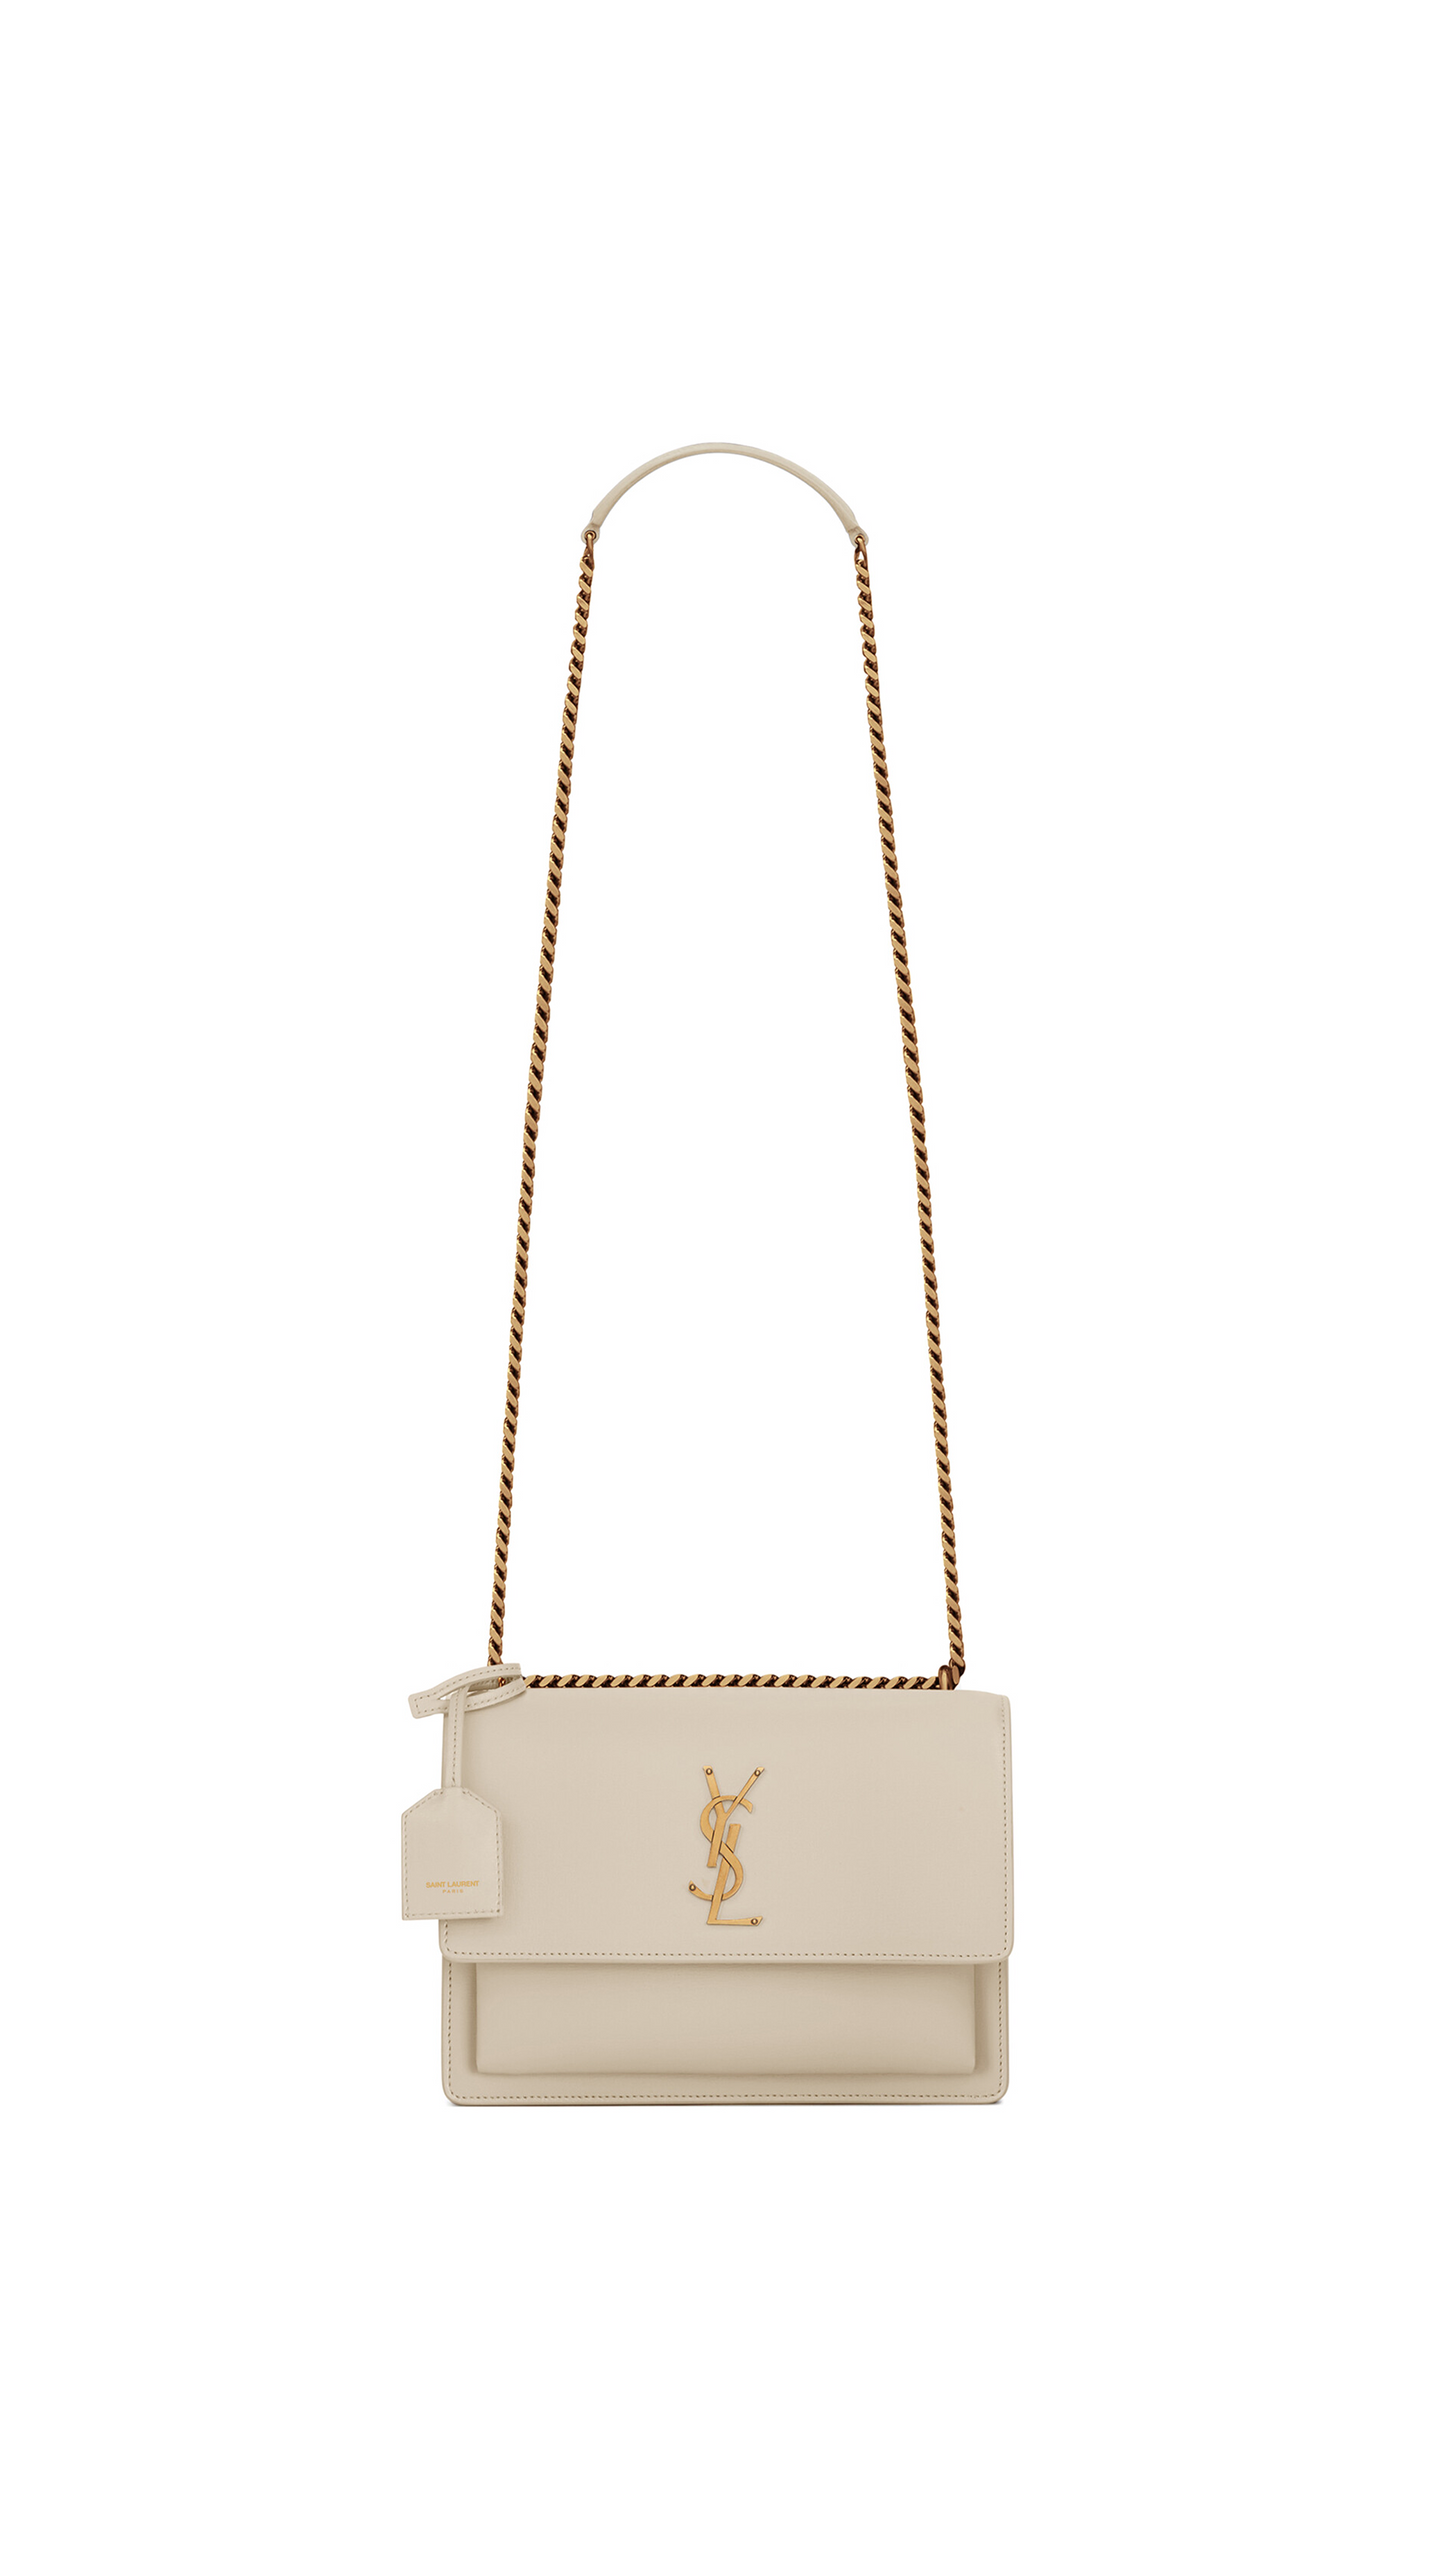 Sunset Medium Chain Bag in Smooth Leather - Blanc Vintage